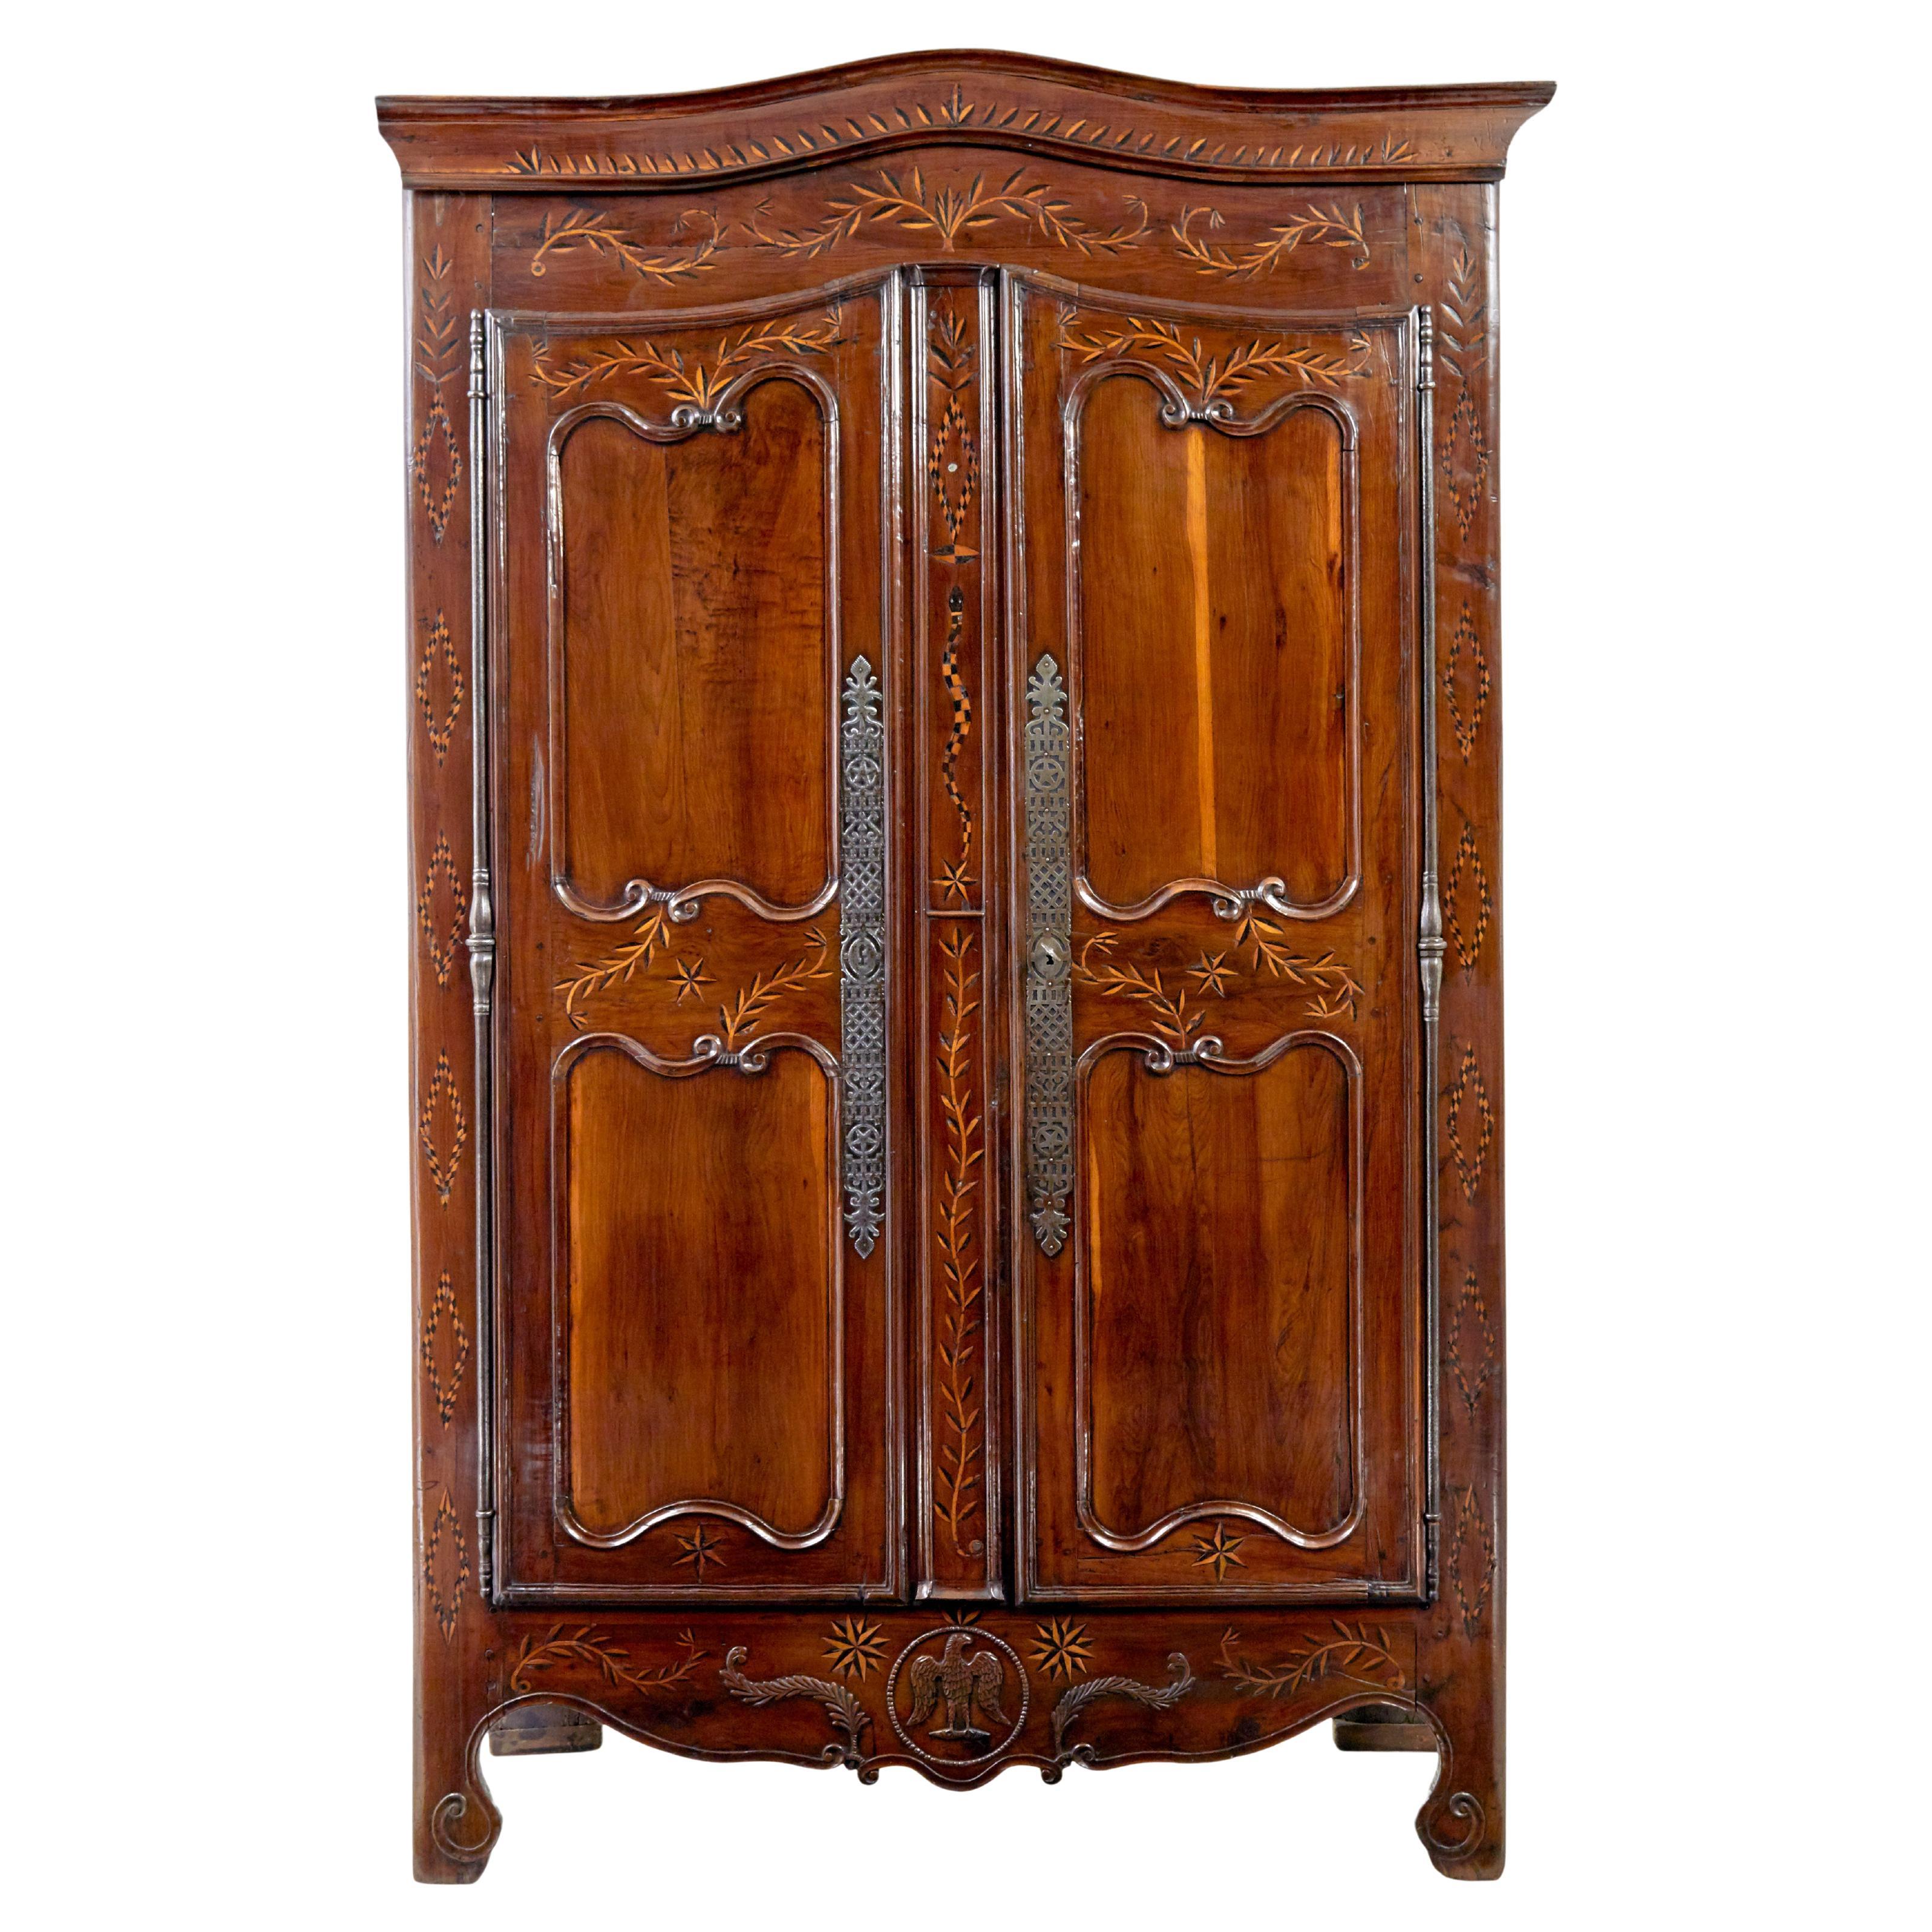 18th century carved French yew and chestnut armoire